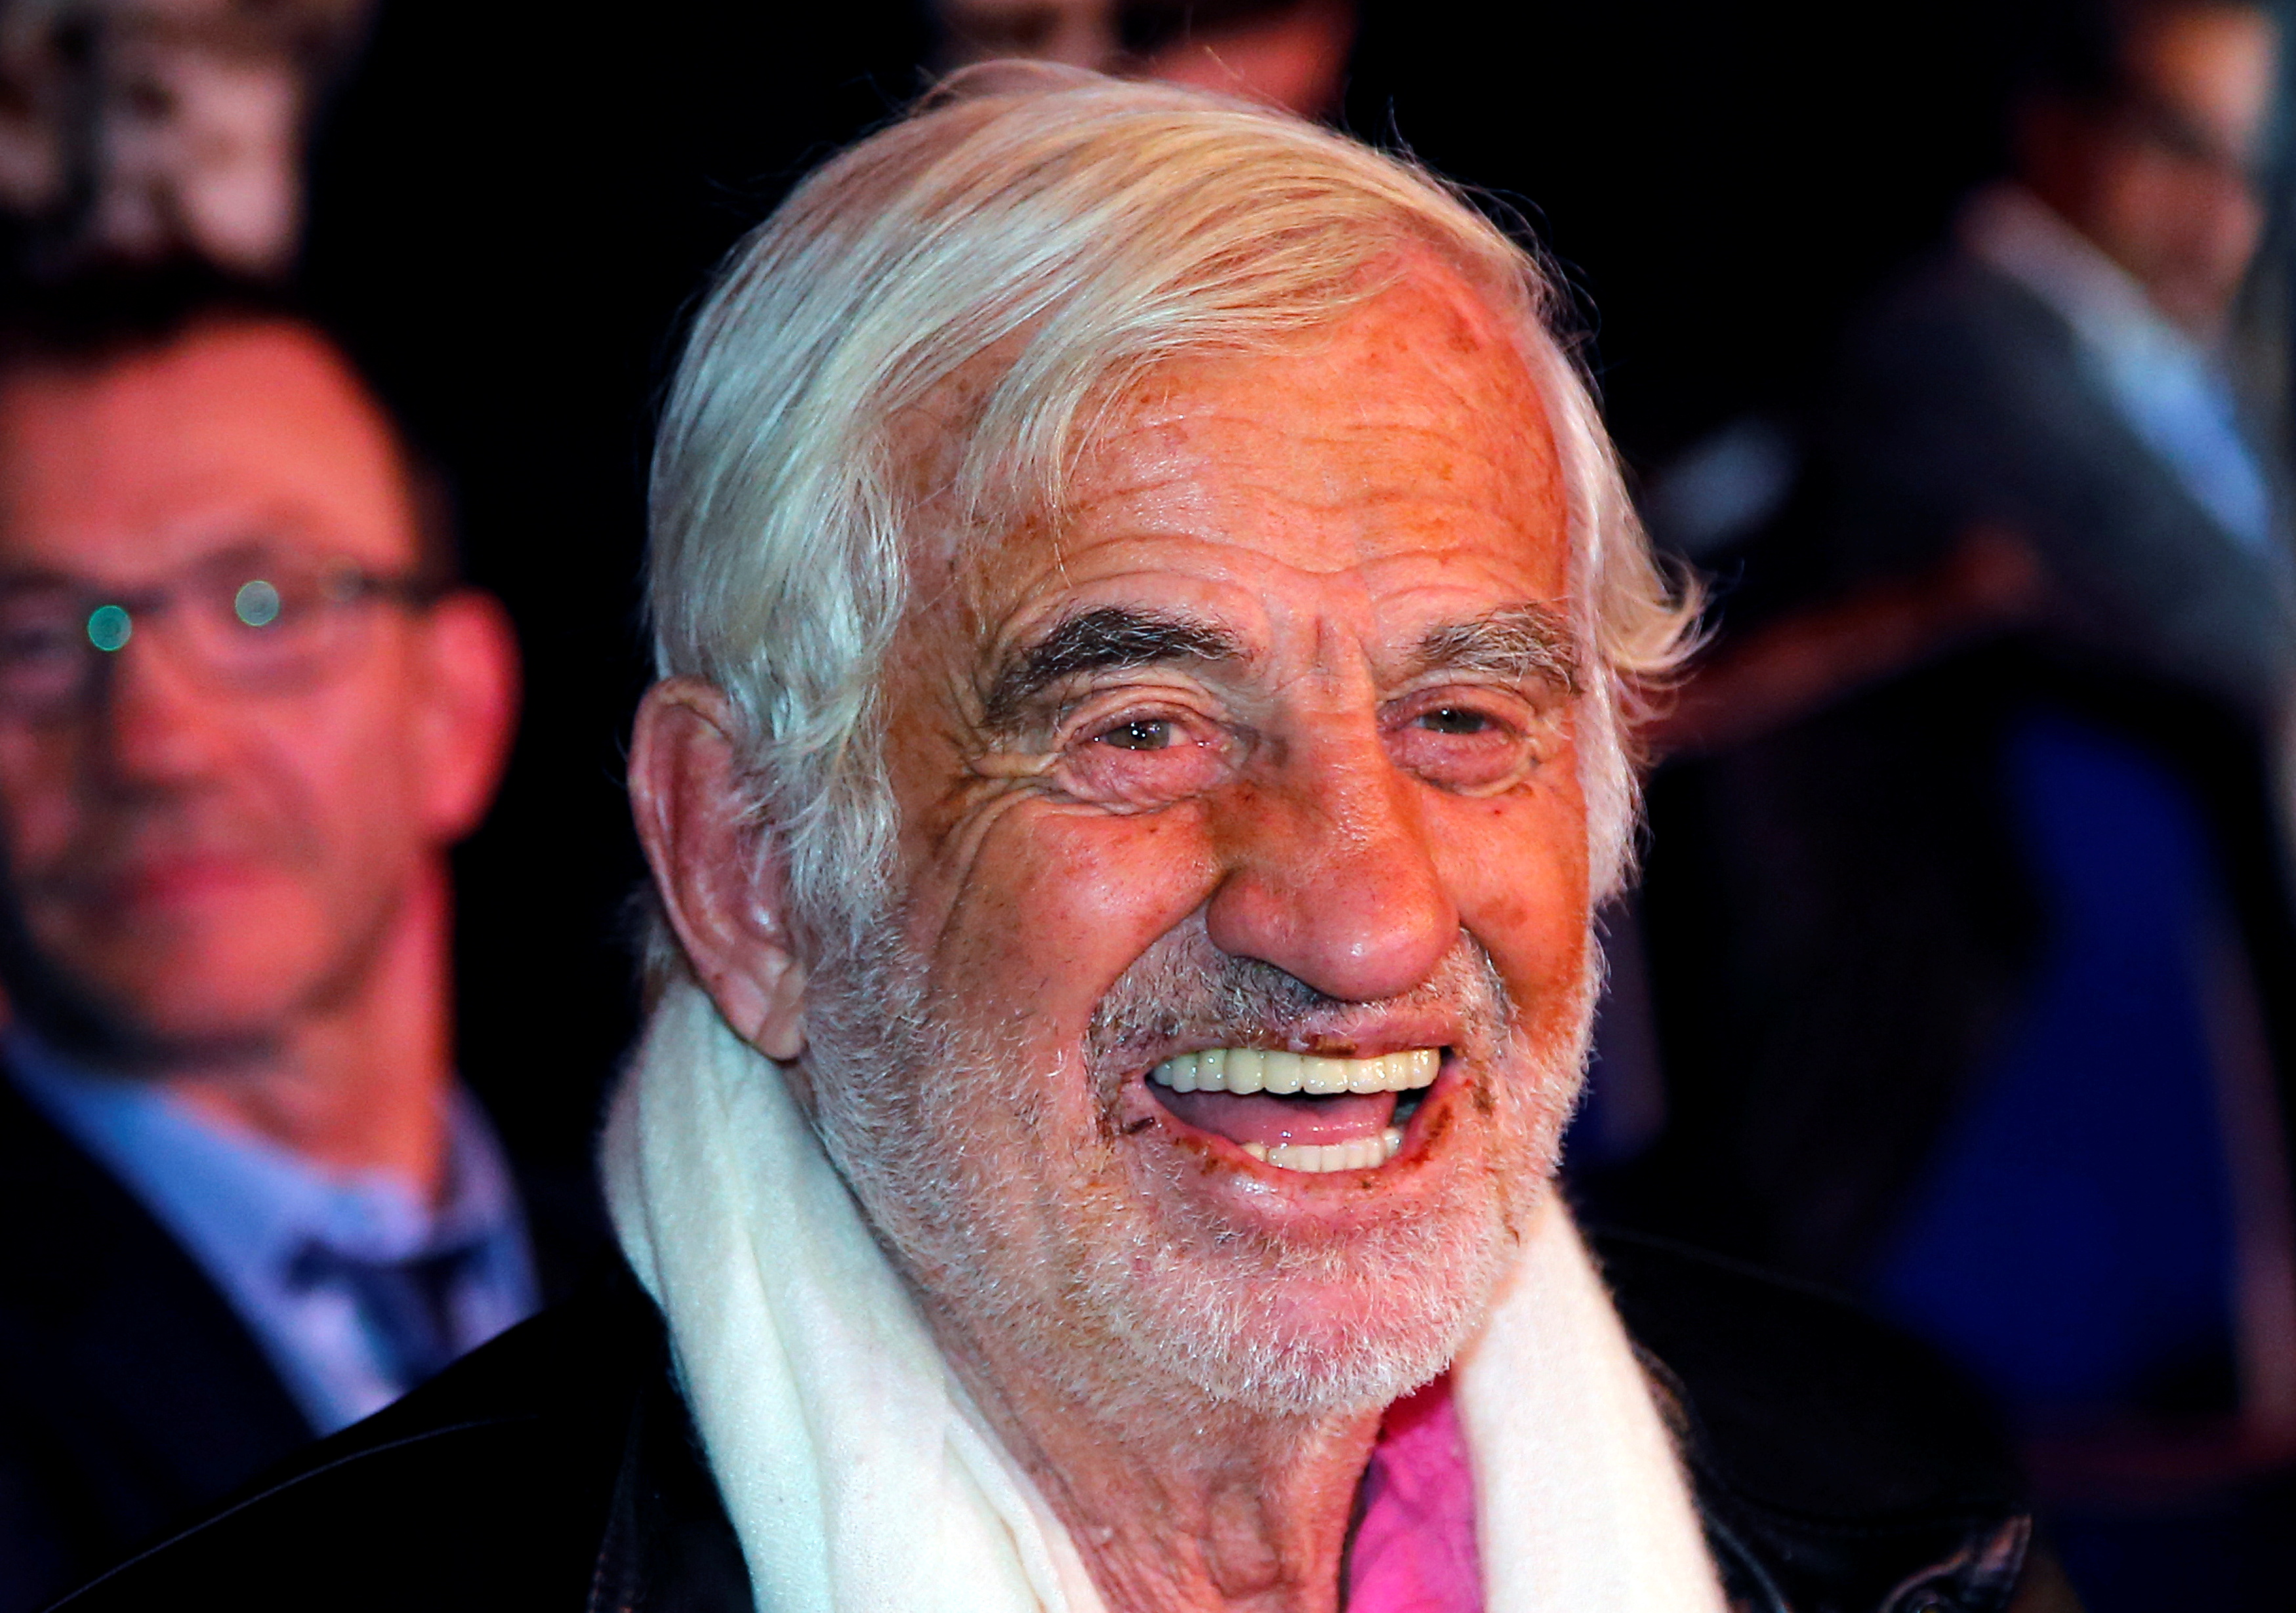 Ramkoers Met opzet Immuniteit France mourns "immortal" Belmondo, will pay national tribute on Thursday |  Reuters